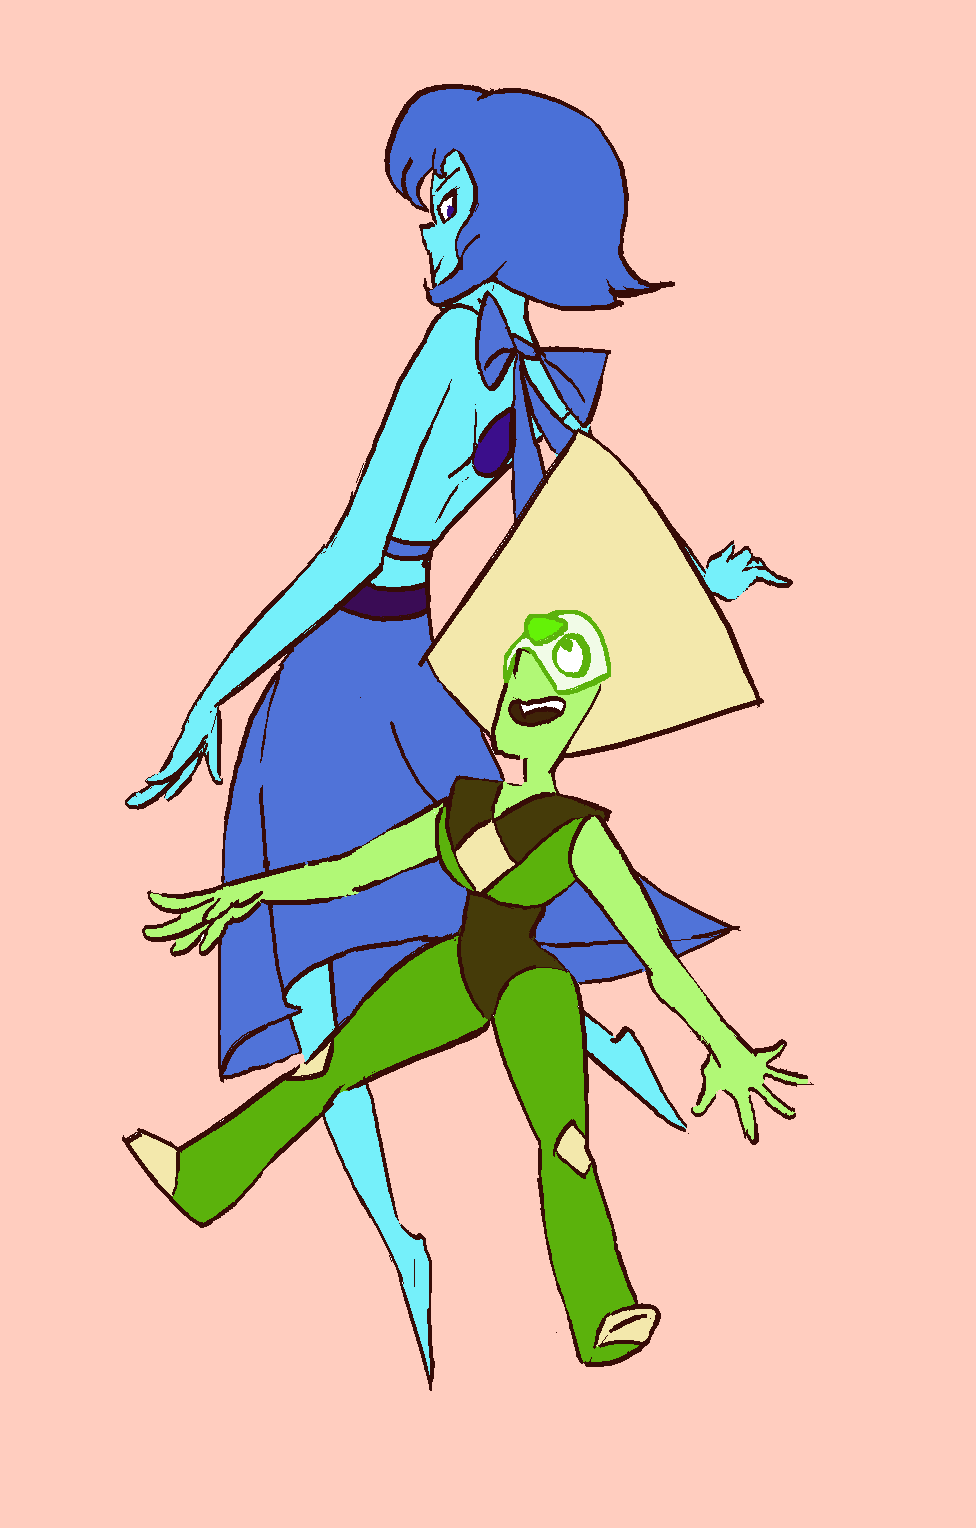 what if lapis and peridot’s fusion dance was a lindy hop for real look up whitey’s lindy hoppers on youtube and be given a smile (the hellzapoppin’ one is A++)